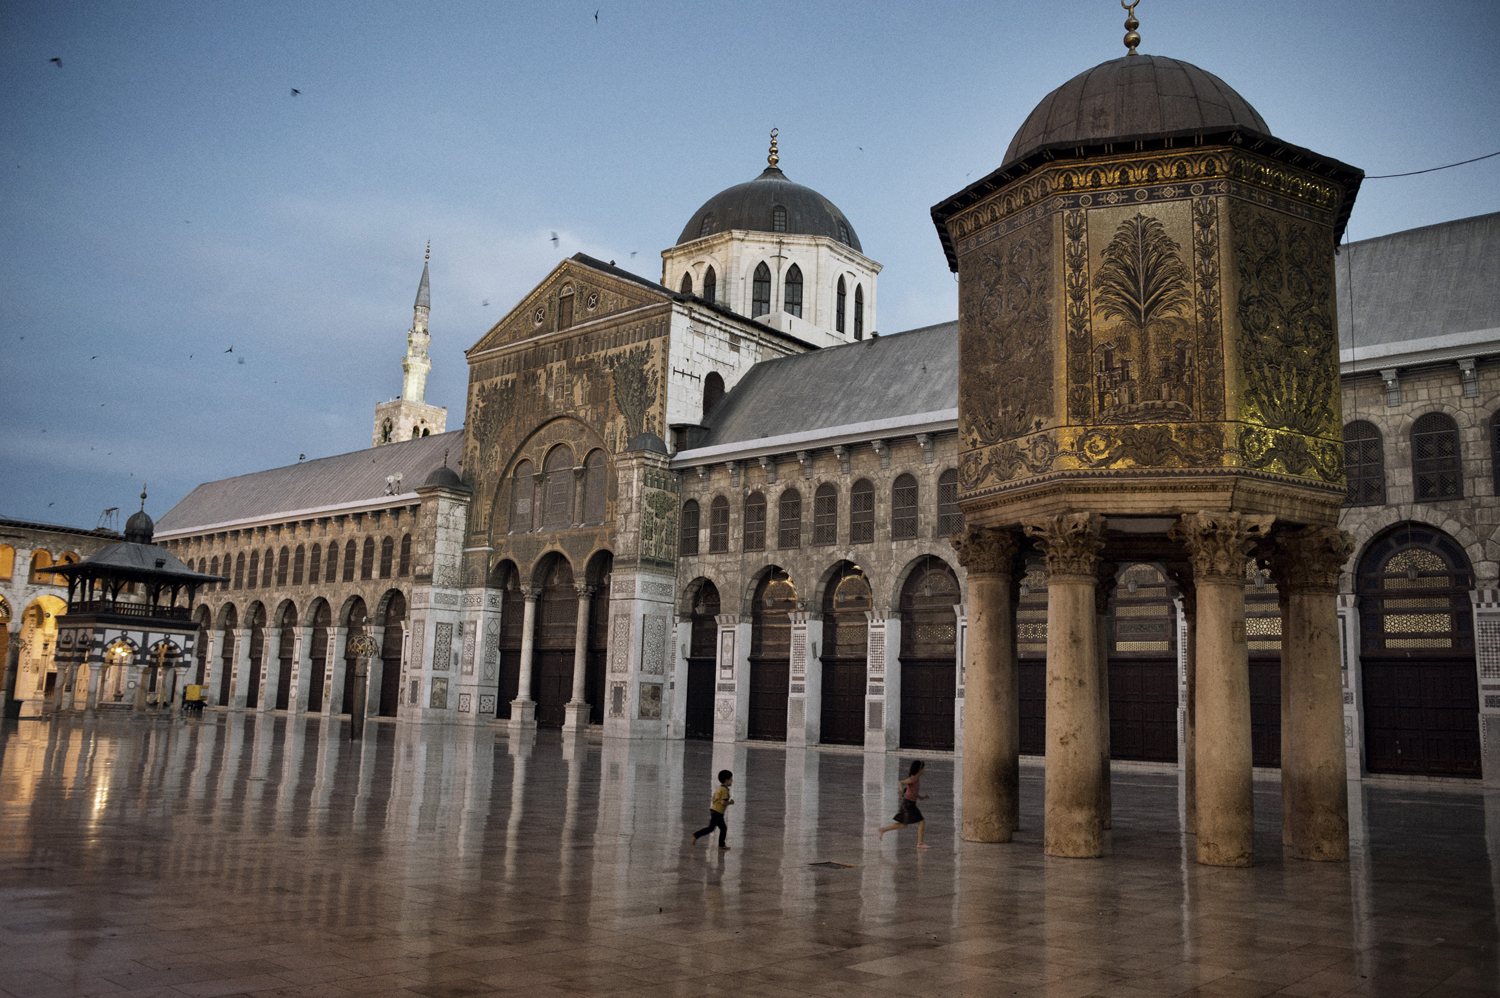 Courtyard of the Umayyad Mosque in Damascus, May 18, 2014.